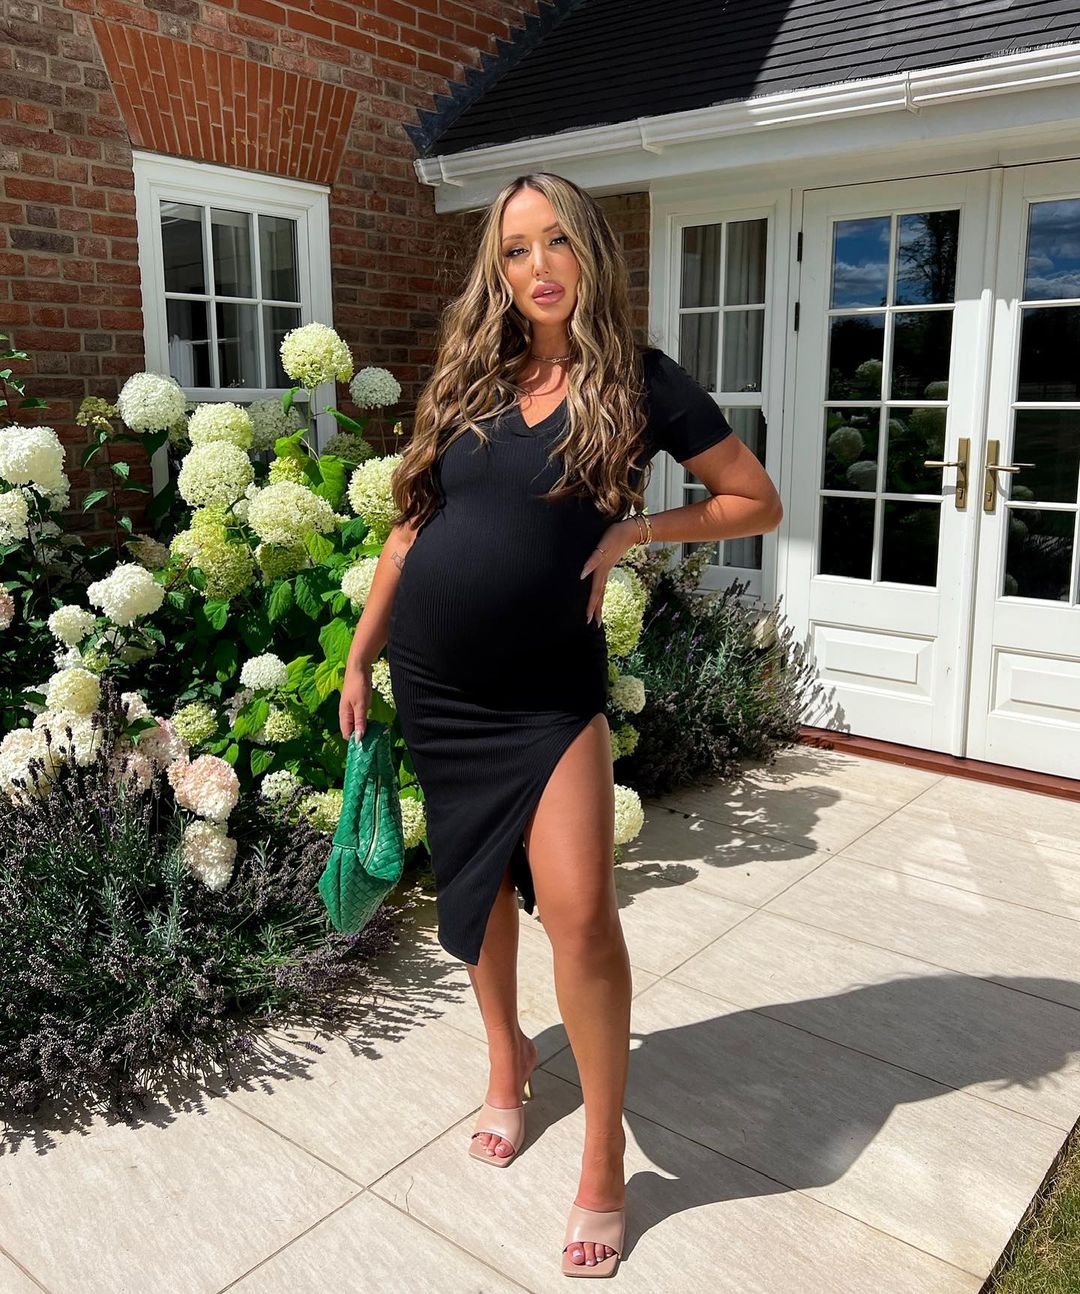 Charlotte Crosby - Still Scared From the Trauma of Life-Threatening Ectopic Pregnancy